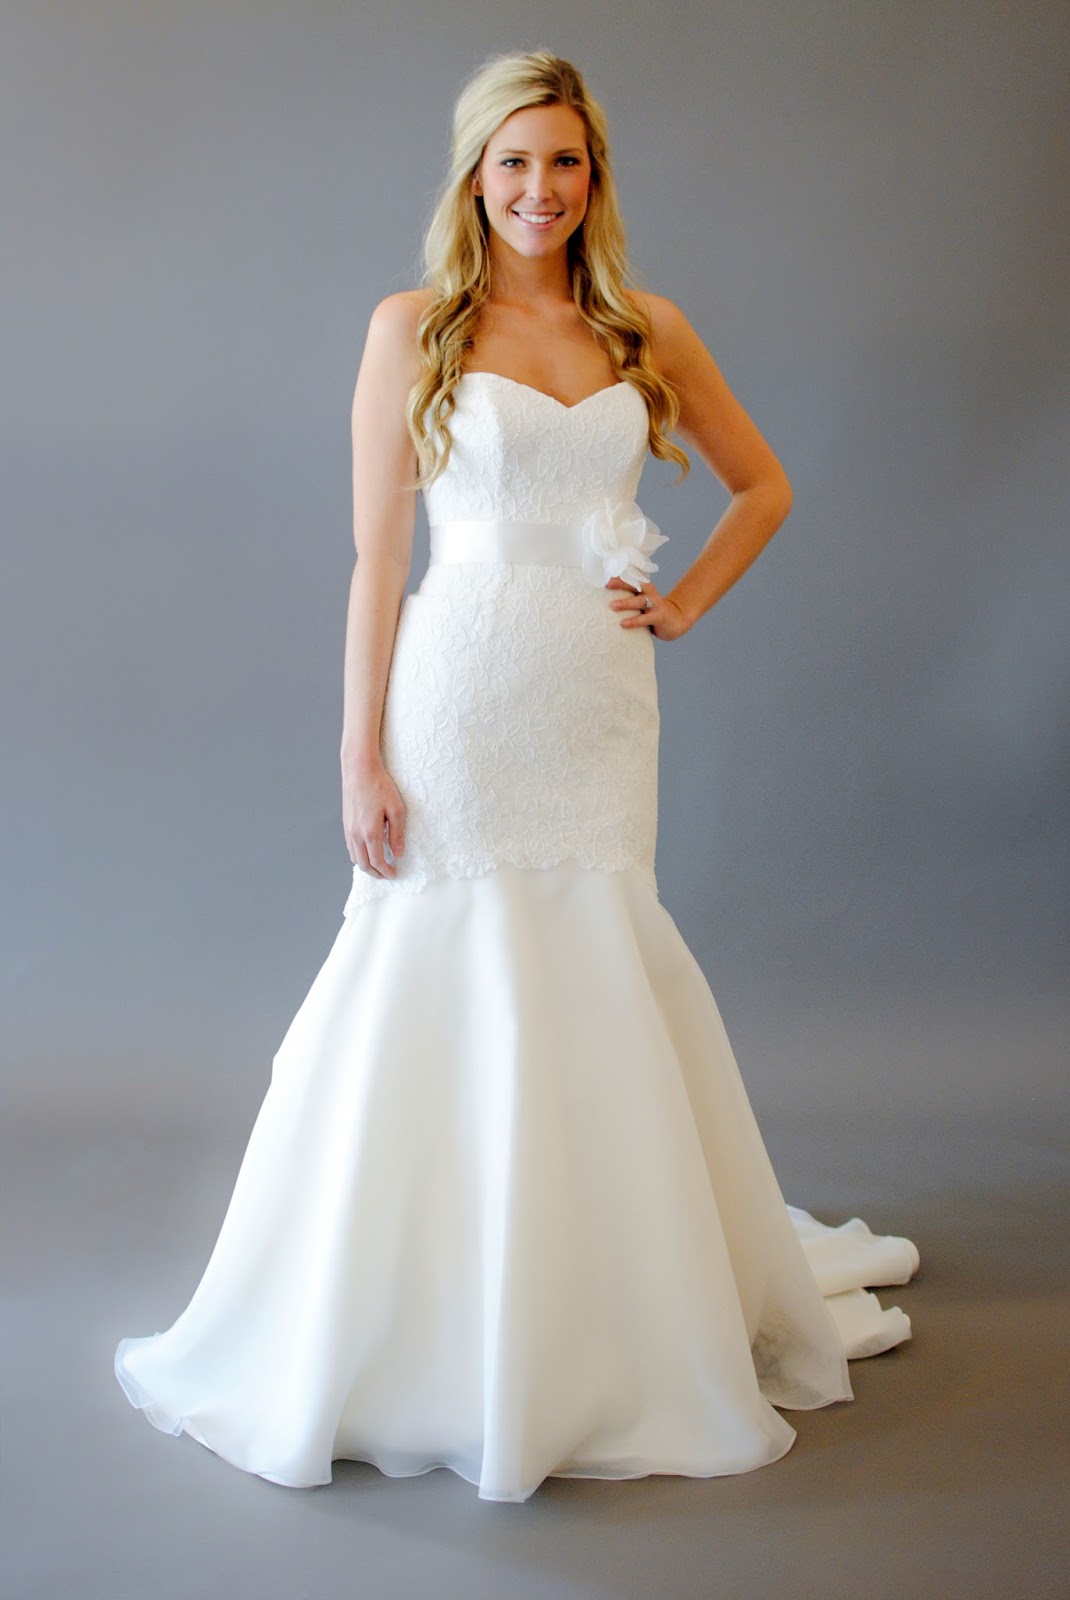 lace wedding dress with keyhole back  Lace gown with dramatic V back andsatin sash. The back is to die for